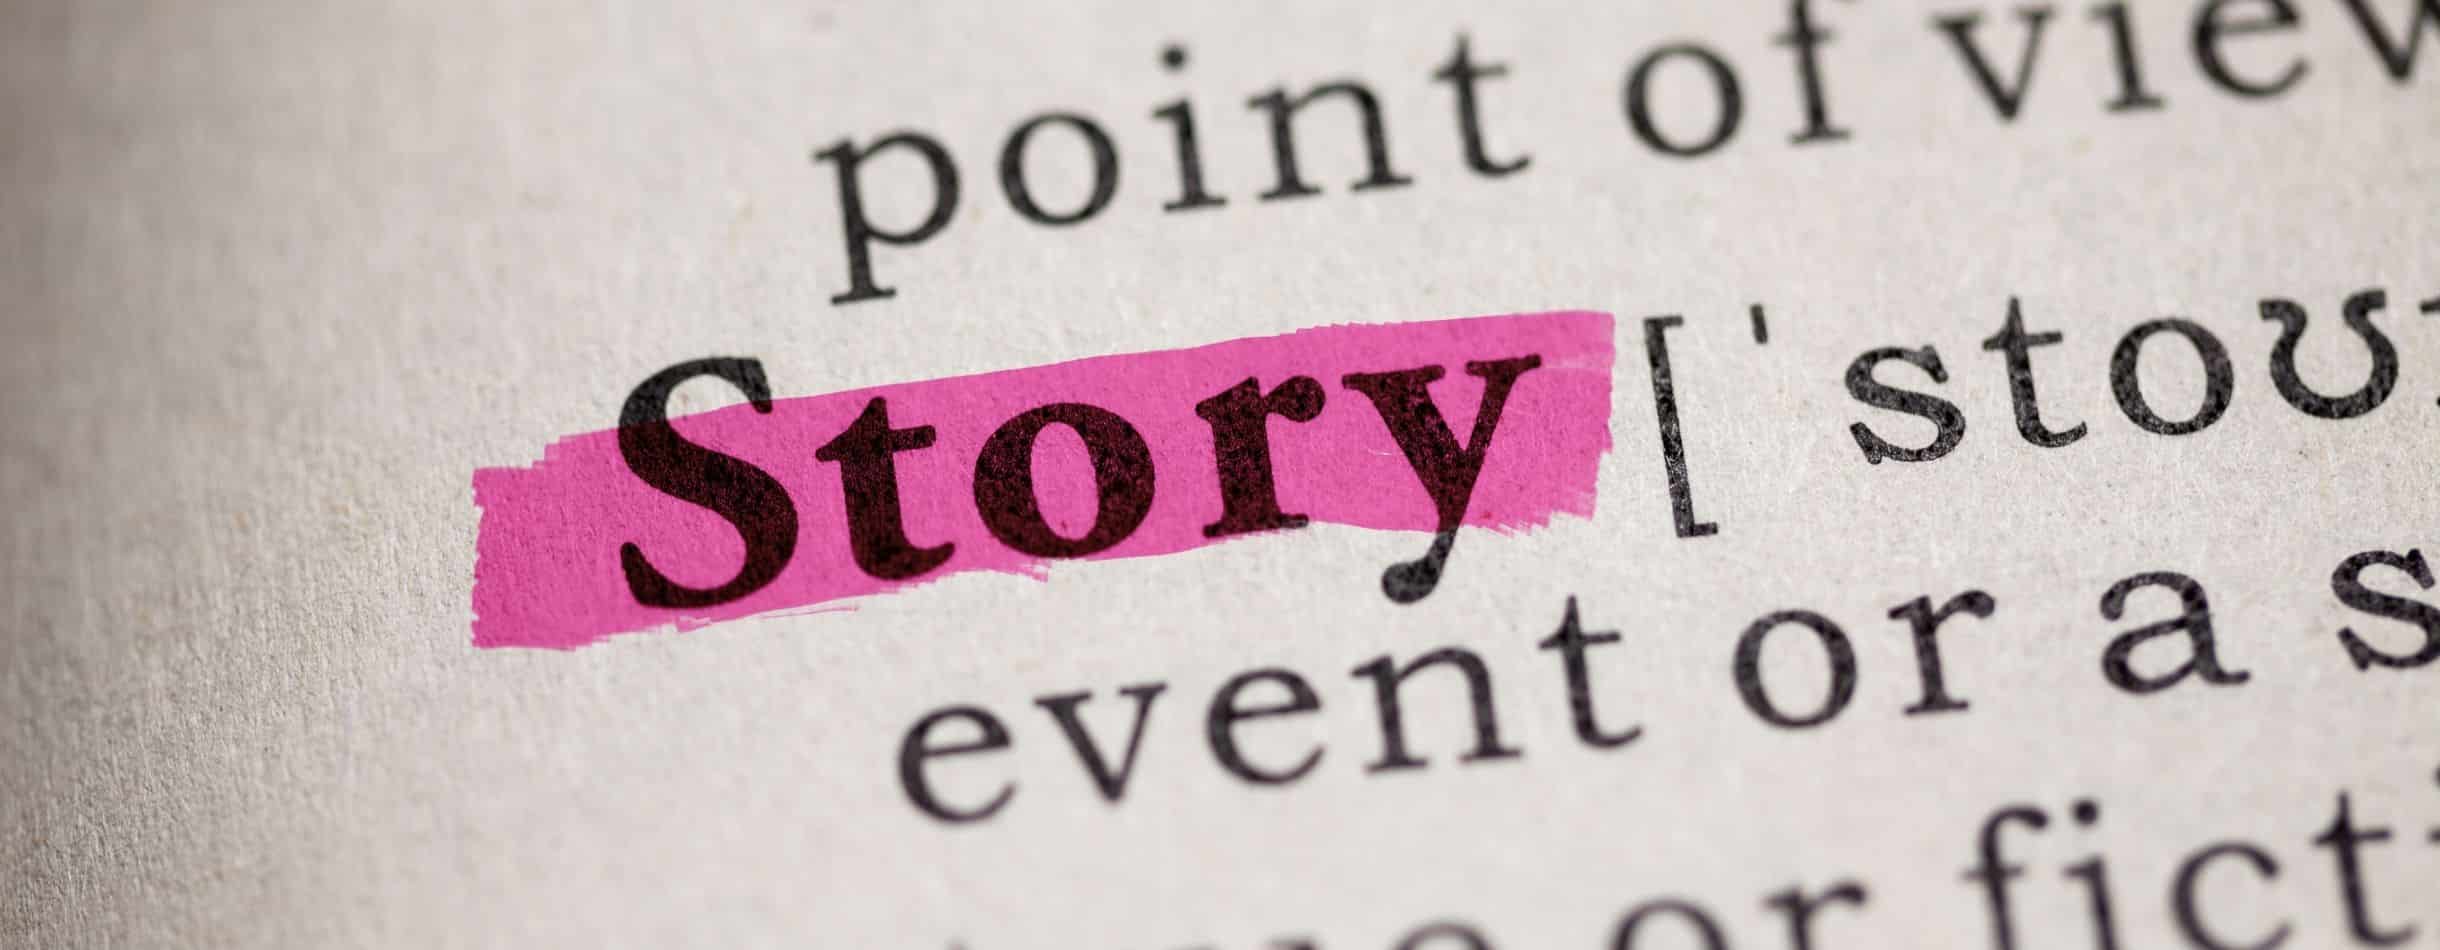 A dictionary lays out with the word Story highlighted in purple. It's used to emphasize the word Story alone rather than a full definition.